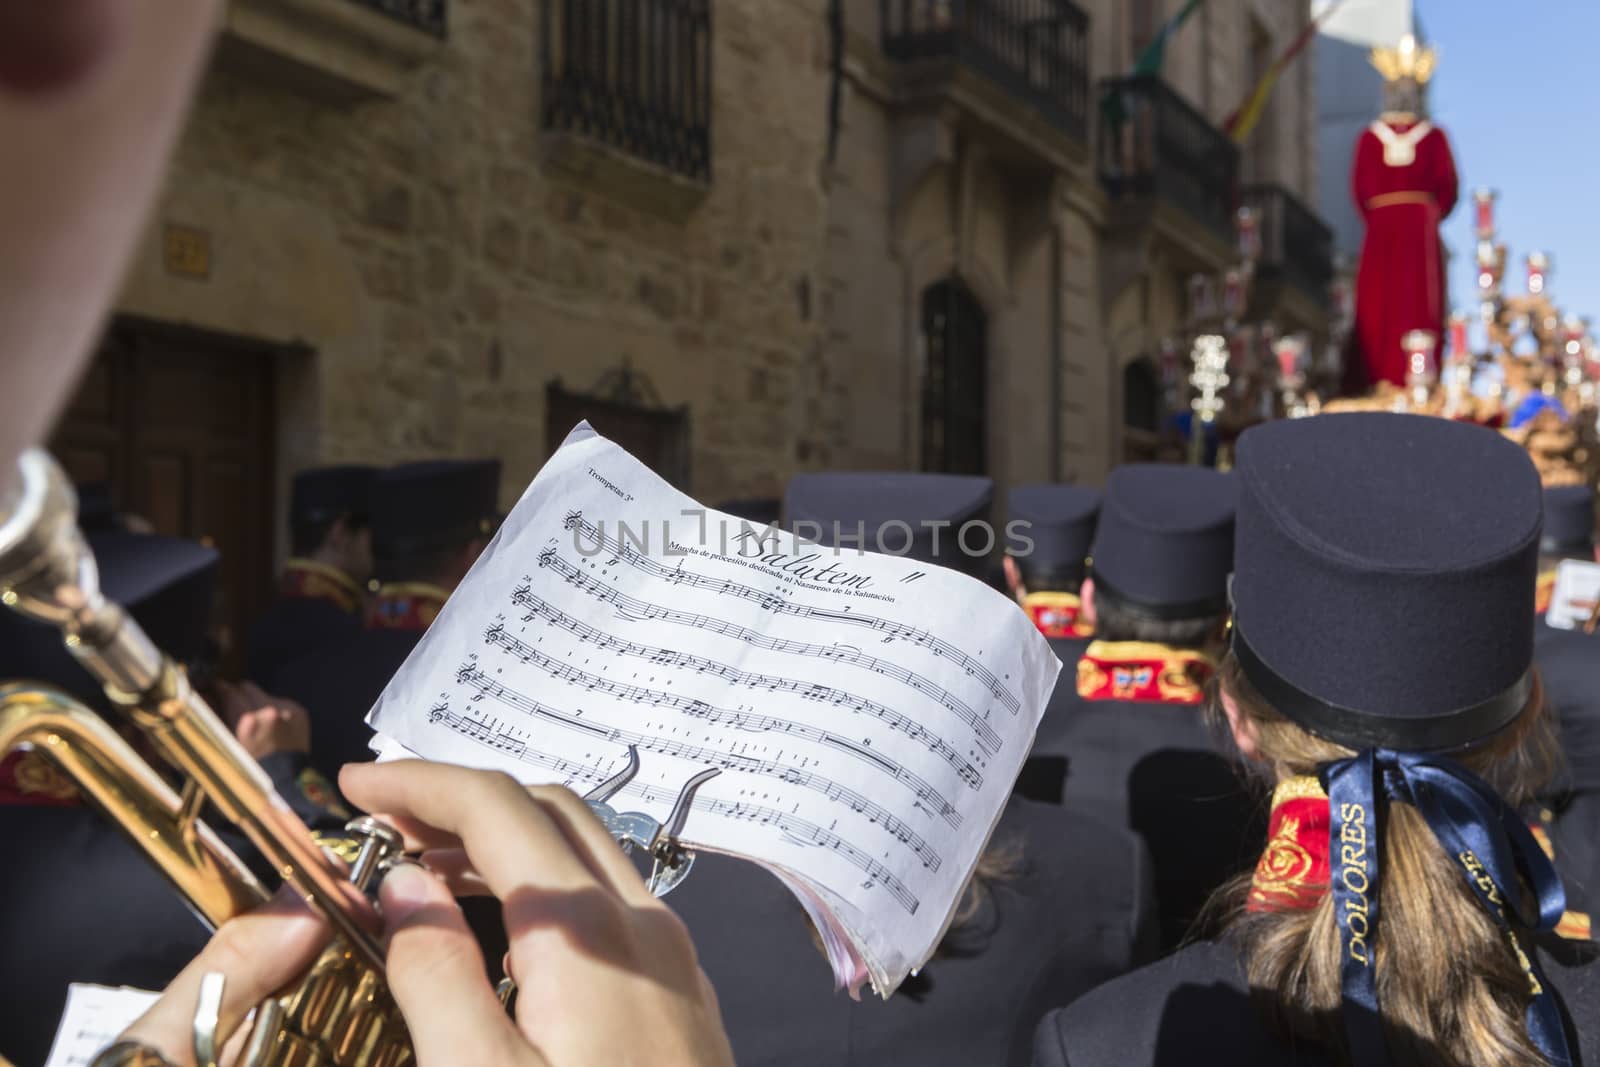 Linares, jaen province, SPAIN - March 17, 2014: Brotherhood of Jesus rescue making station of penitence, detail of the musician playing the trumpet looking a score, Linares, Jaen province, Andalusia, Spain